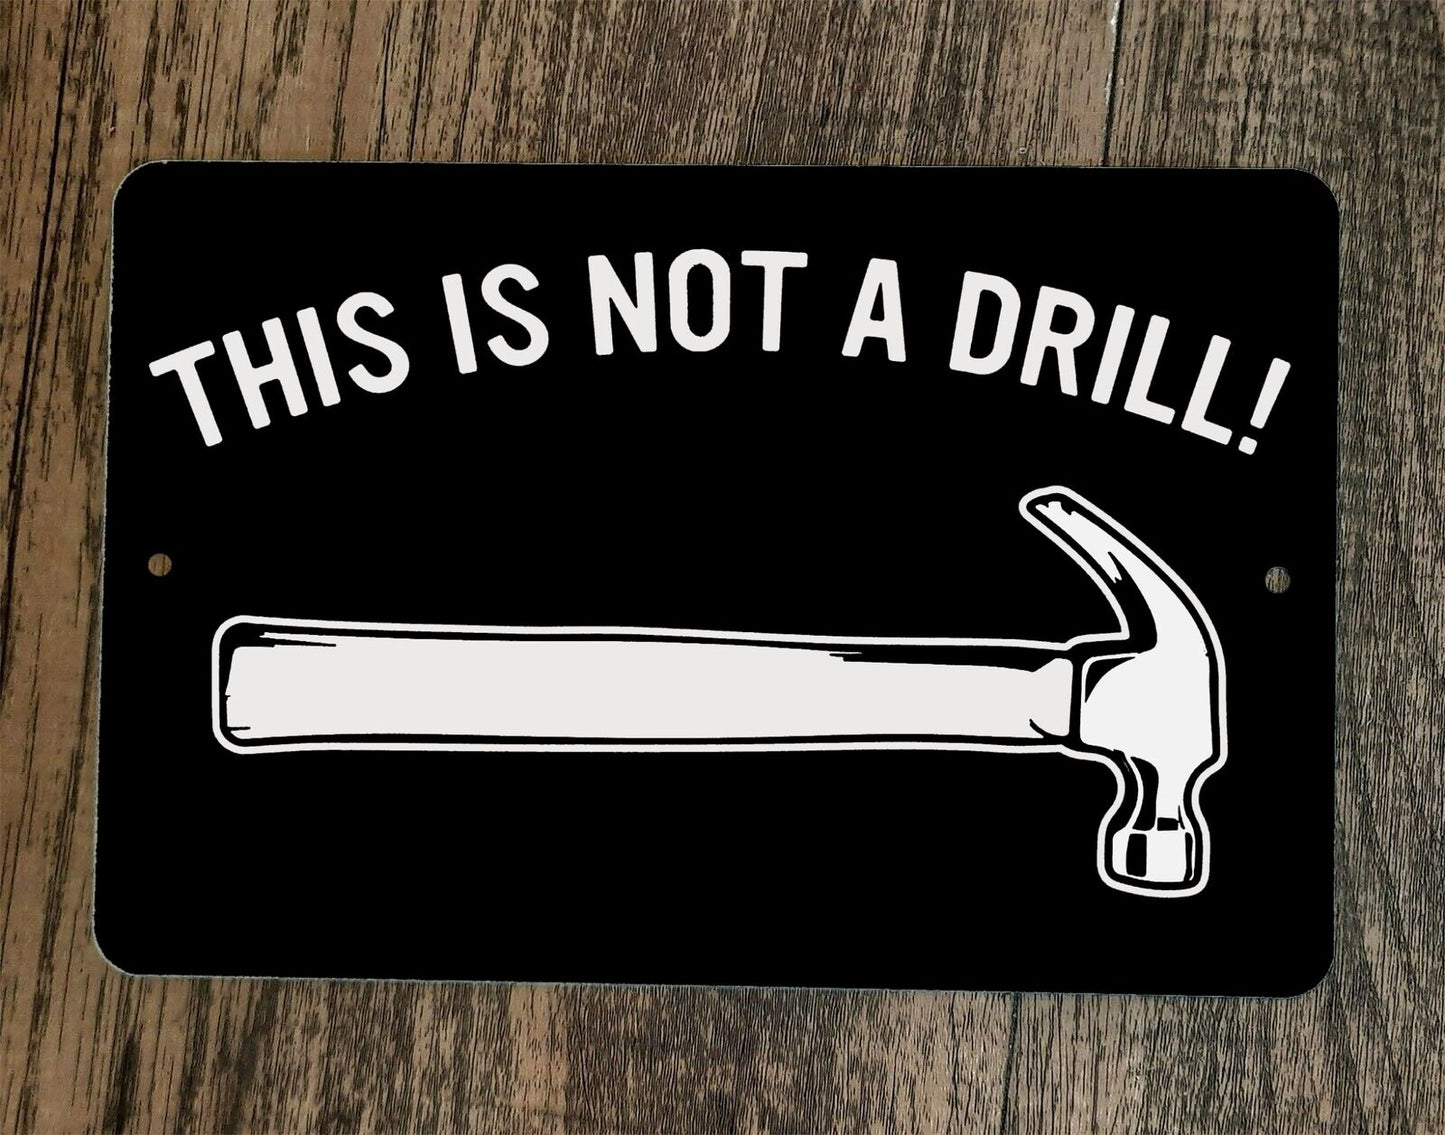 This is Not a Drill 8x12 Metal Wall Sign